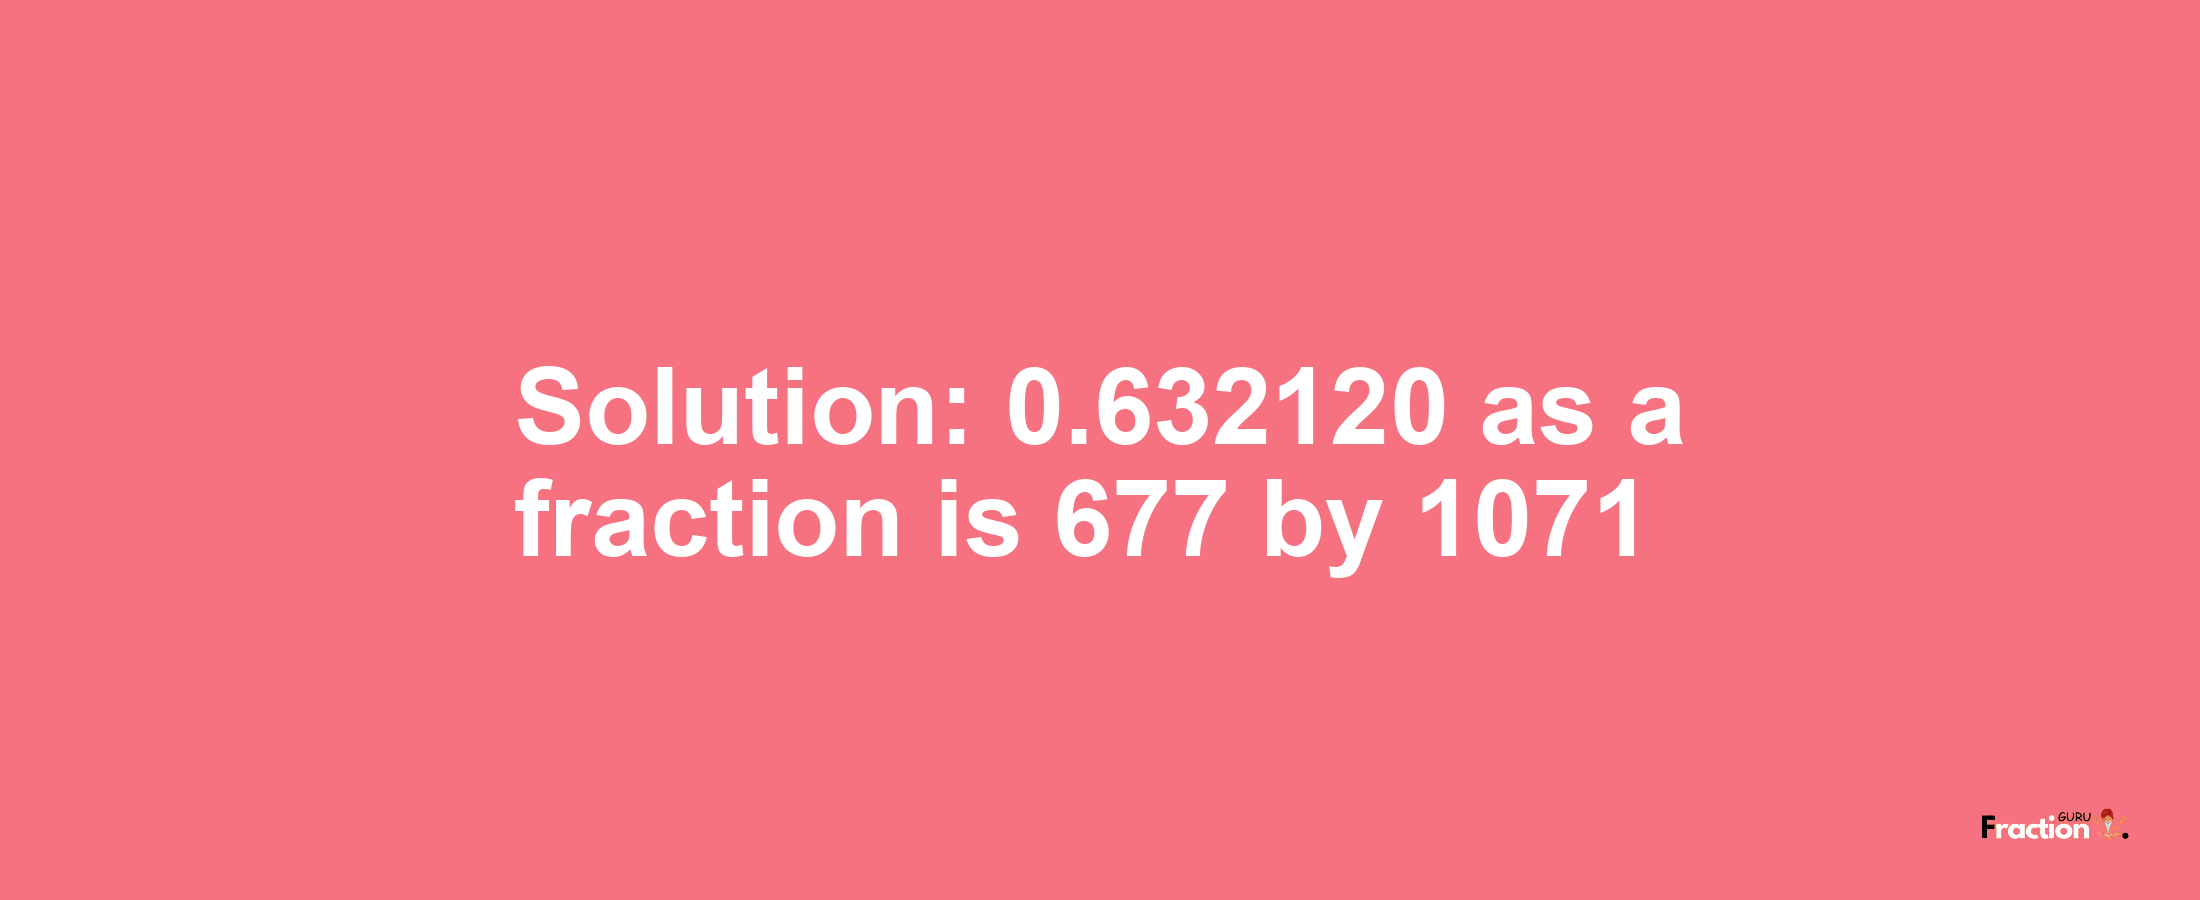 Solution:0.632120 as a fraction is 677/1071